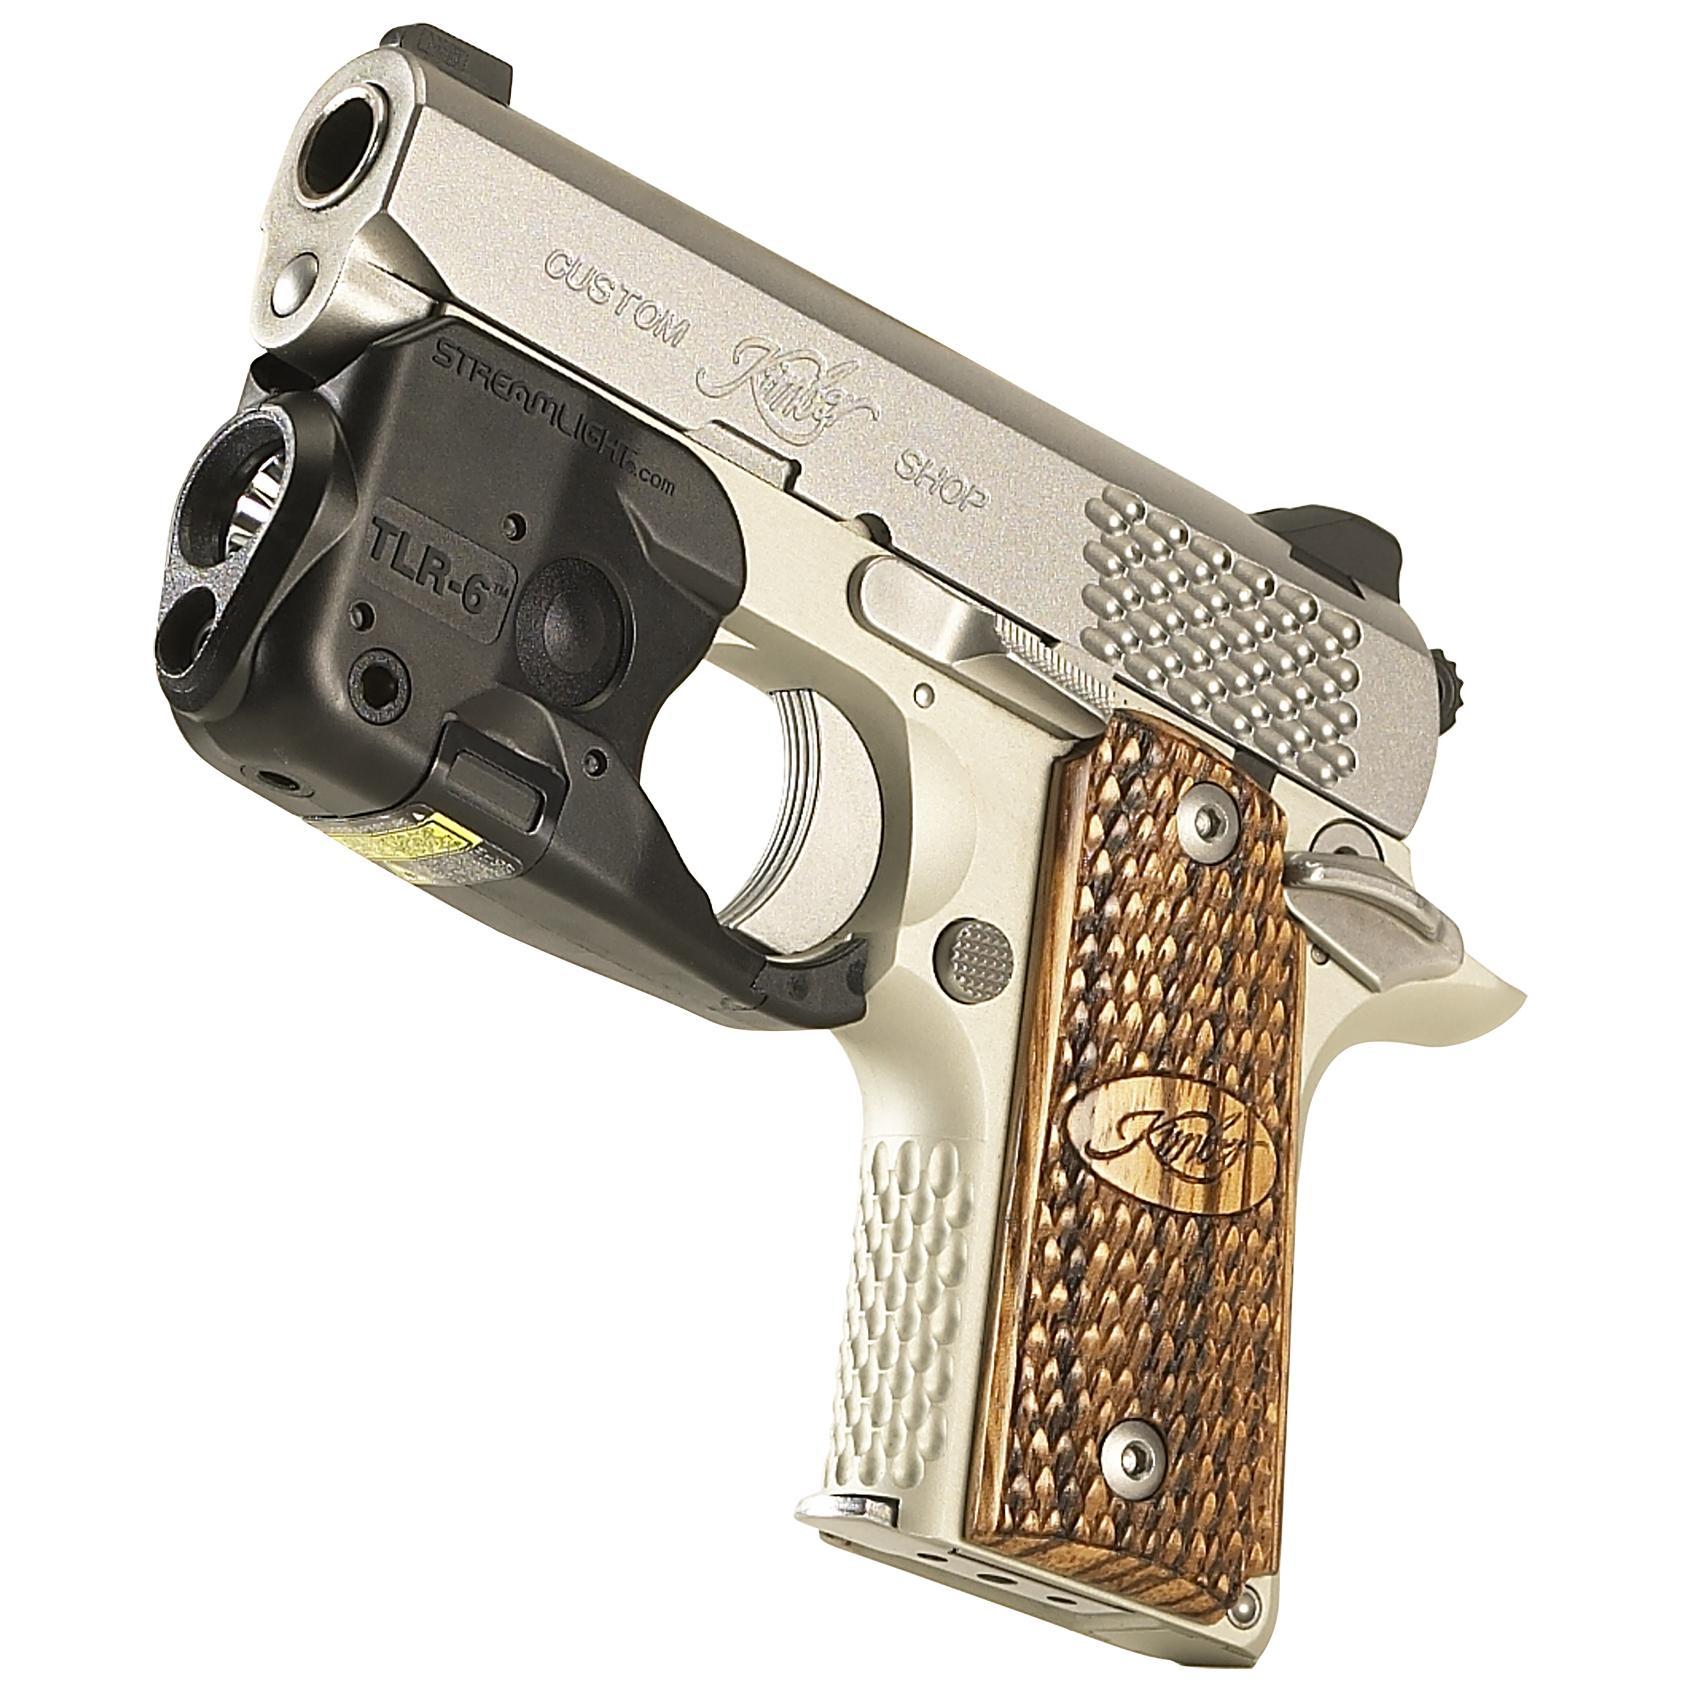 Streamlight 69279 TLR-6 Red Aiming Laser/LED Tactical Light Combo 1911 Pistols 